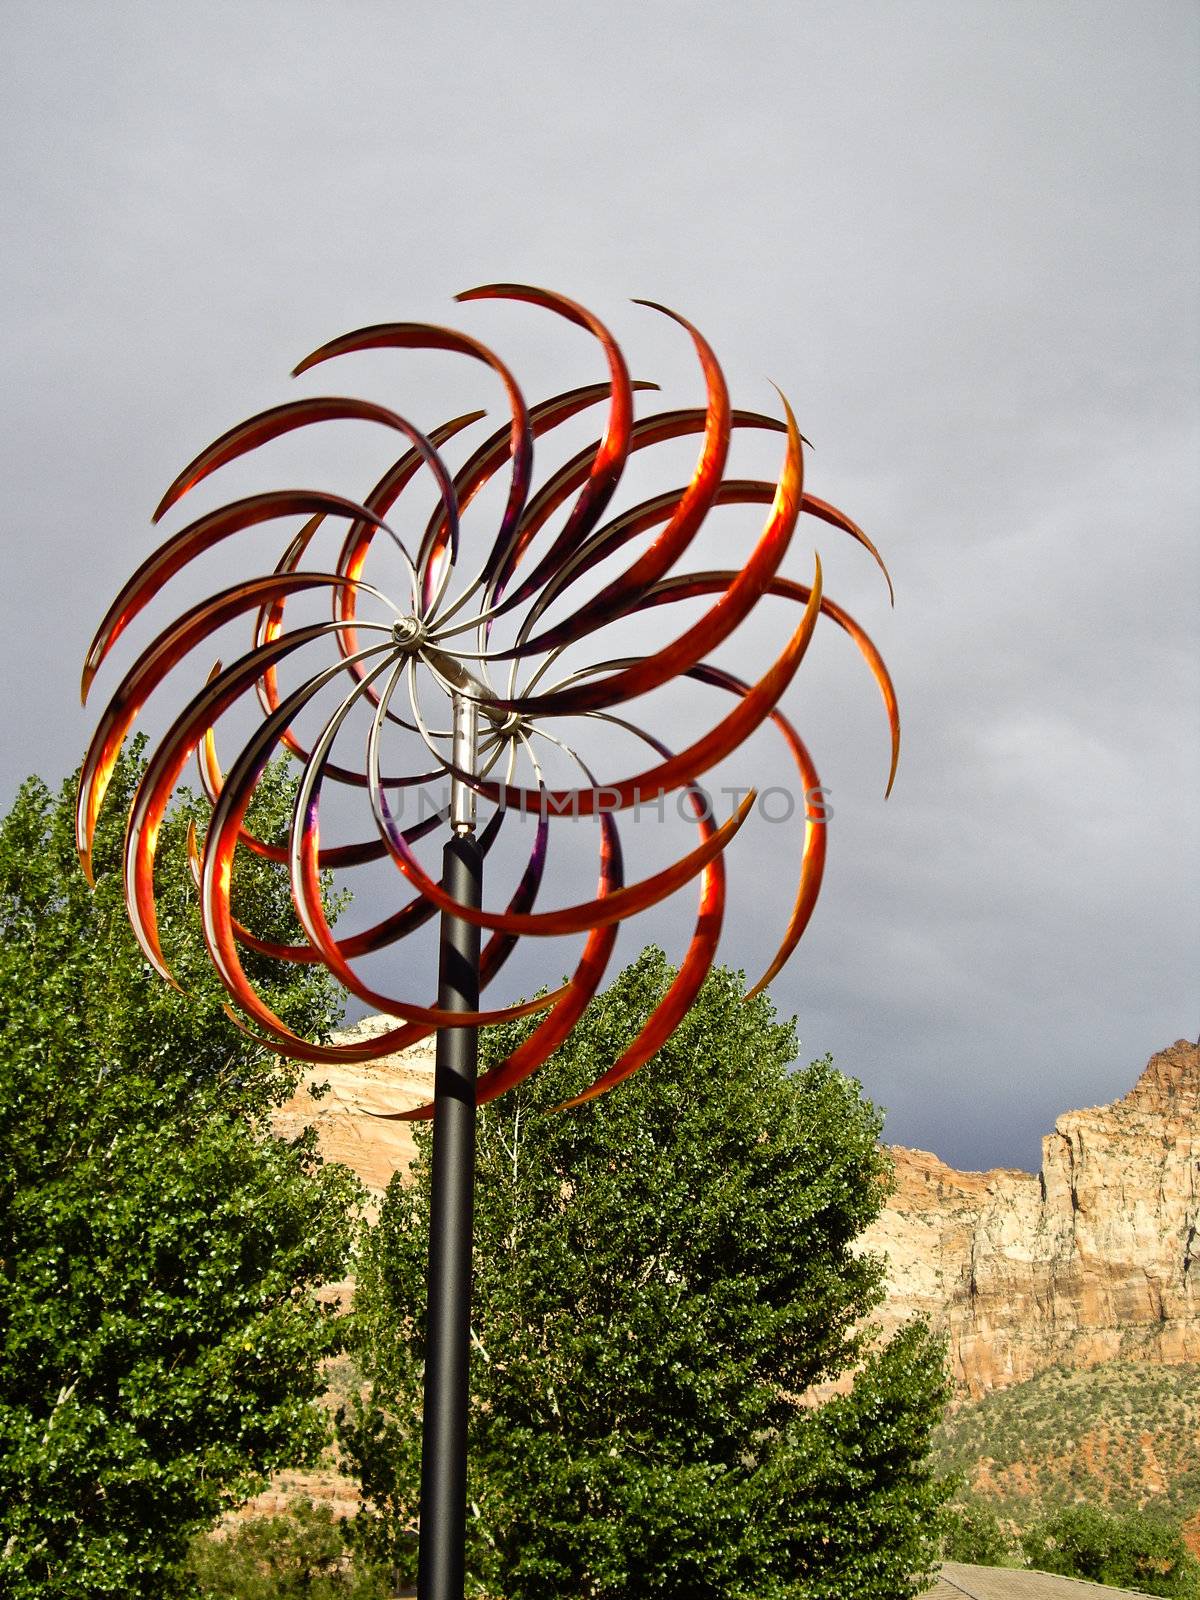 Capture the Wind at Zion by emattil